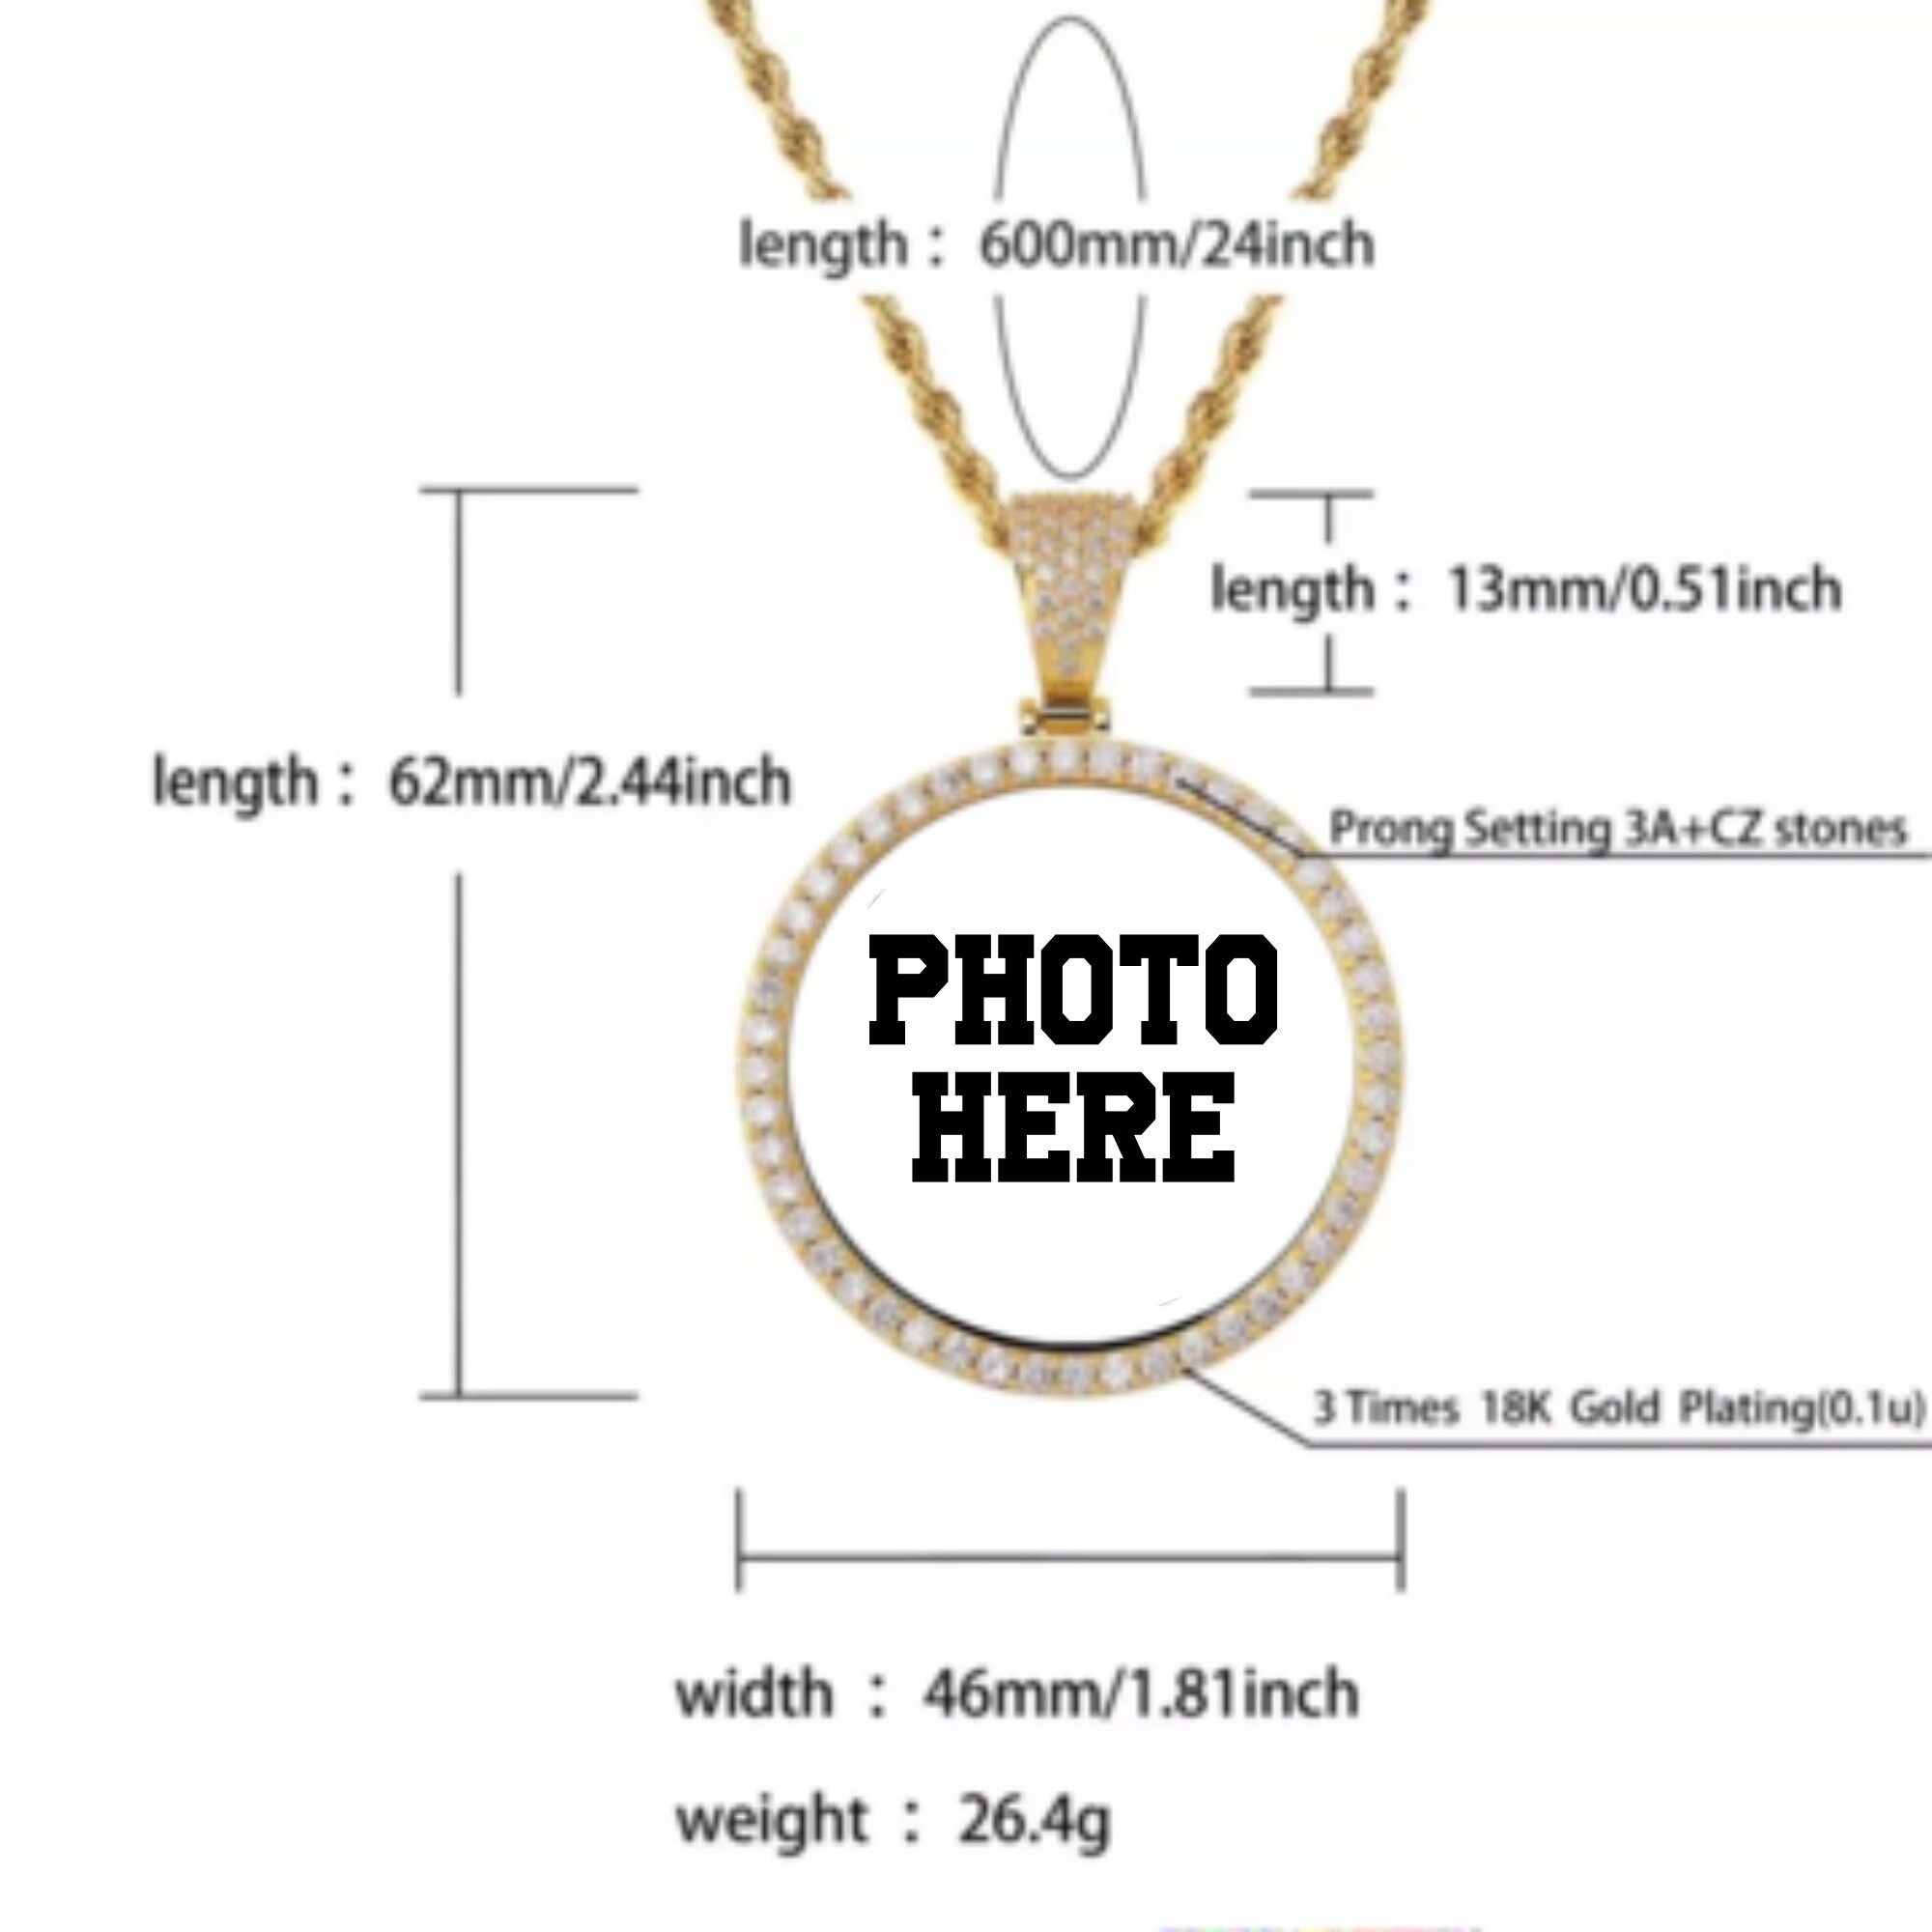 BEDSIFV 75 Pcs Sublimation Blank Rhinestone Bezel Necklace, 15 Pcs 3 Colors Double-Sided Heart Pendant Trays with Thick Necklace Chain